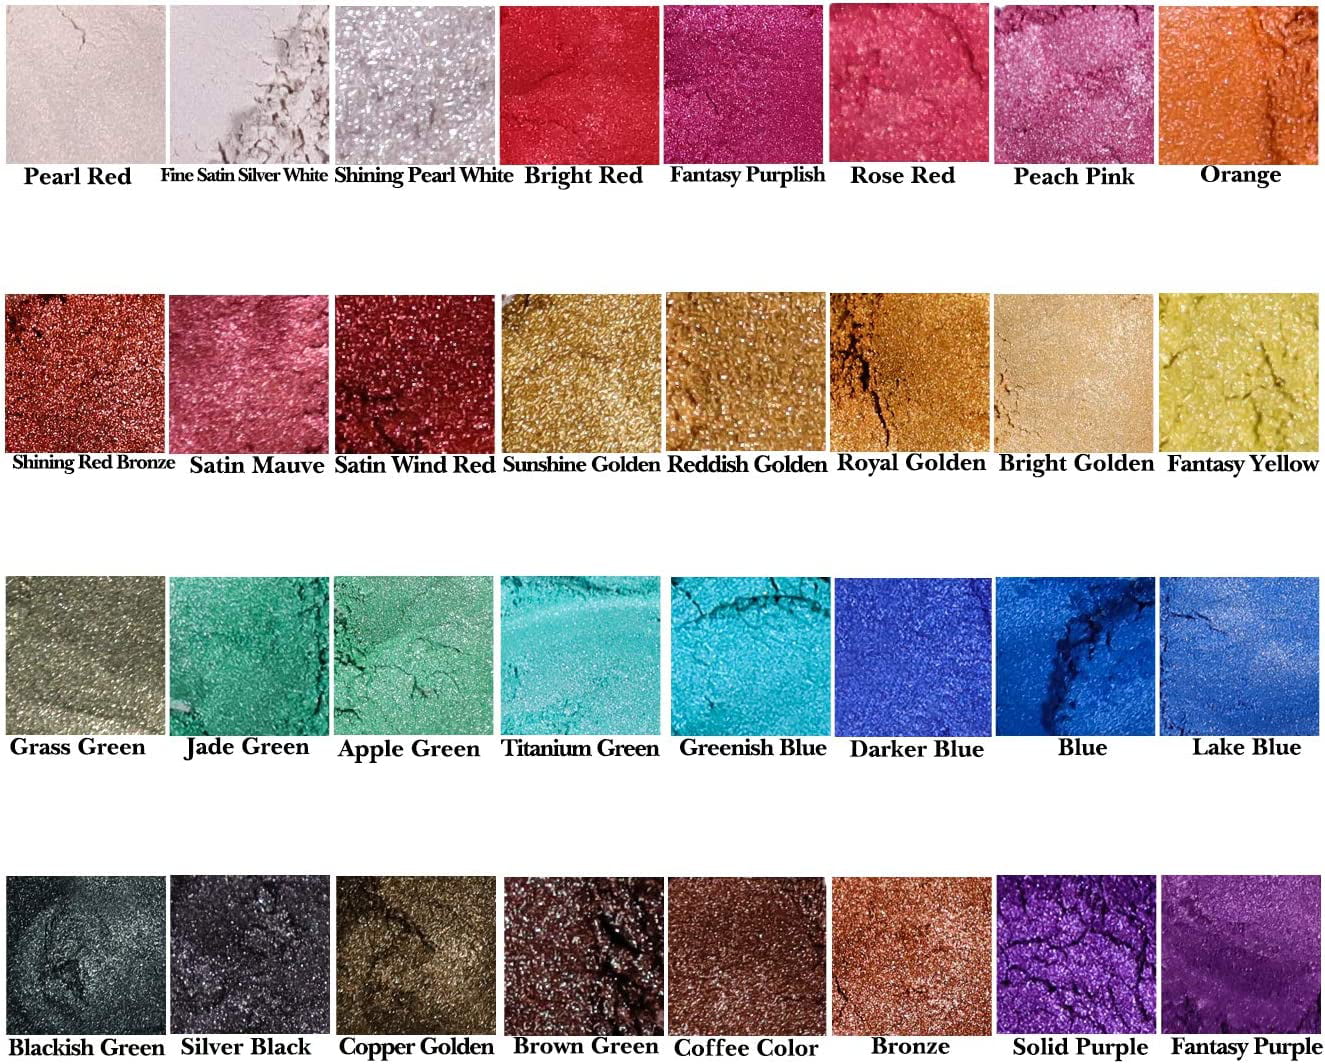 SEISSO Mica Powder Coloring Pigment, Natural Epoxy Resin Dye, Premium Mica  Powder,24 Colors for Lip Gloss, Soap Making, Candle Making, Bath Bomb, Art  Crafts,Nails, Slime,Christmas Gift 